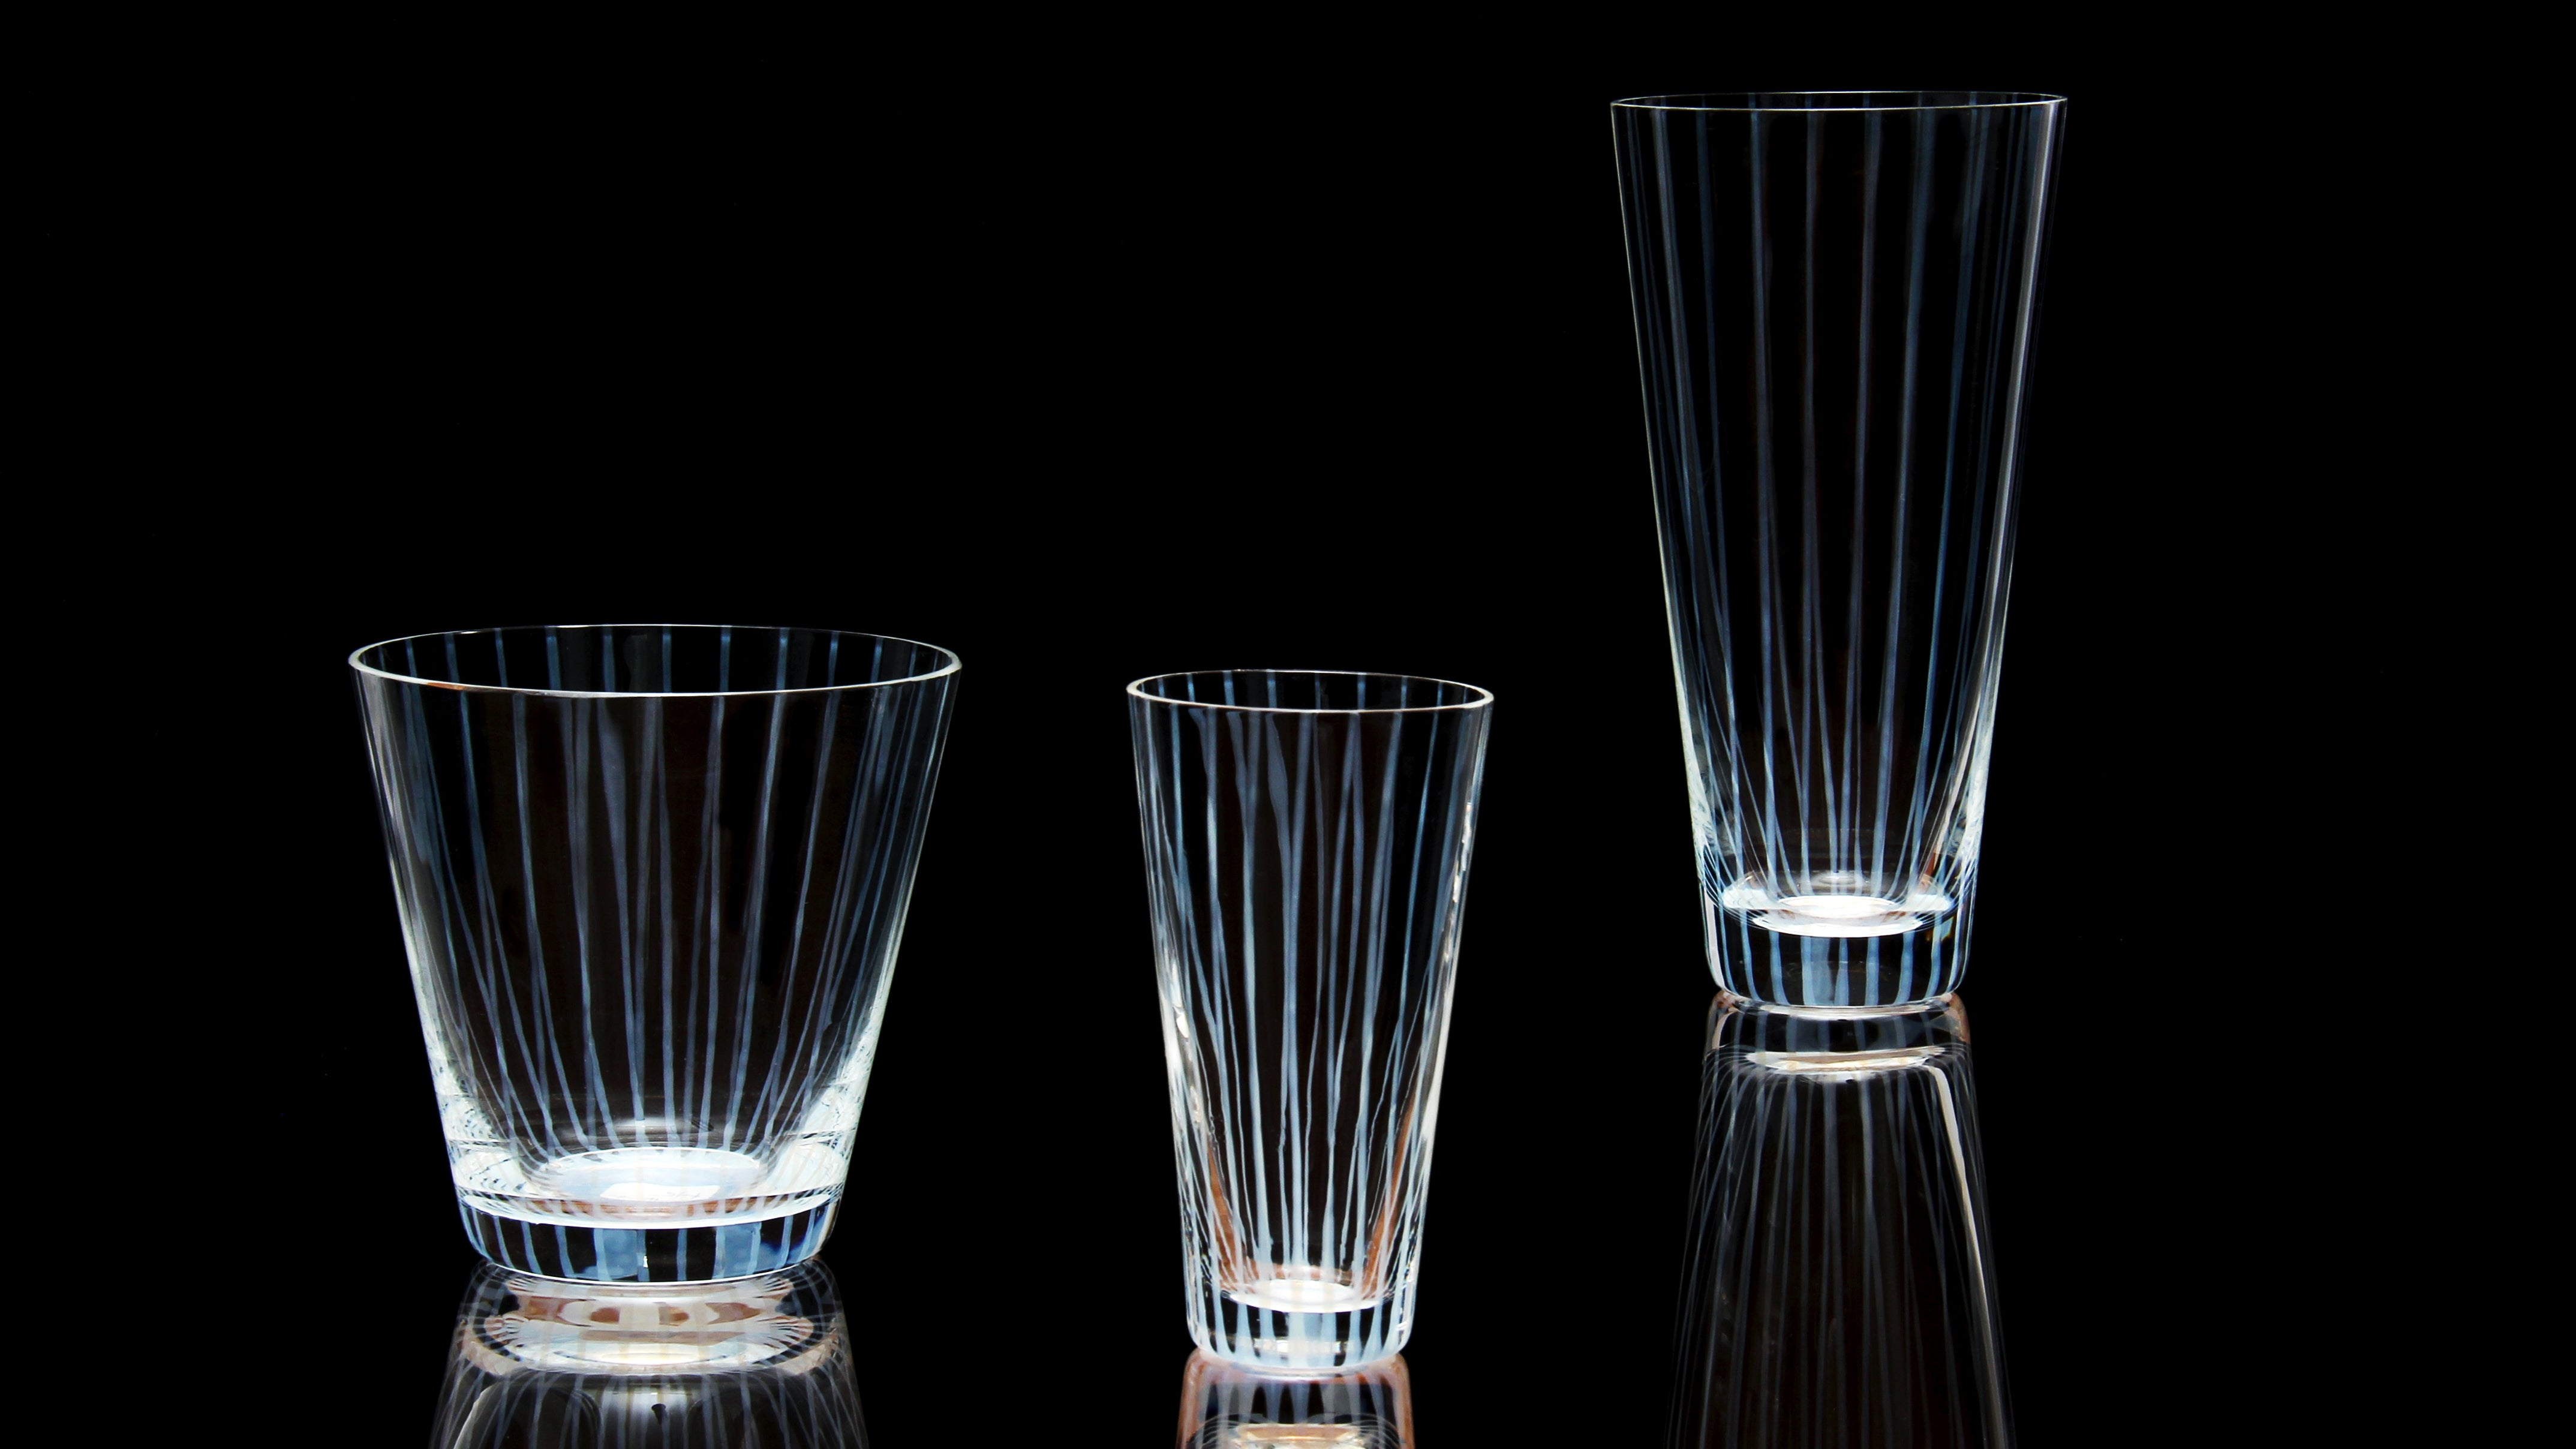 WINTER SALE 15% OFF - JAPANESE STRIPED SIPPING GLASS